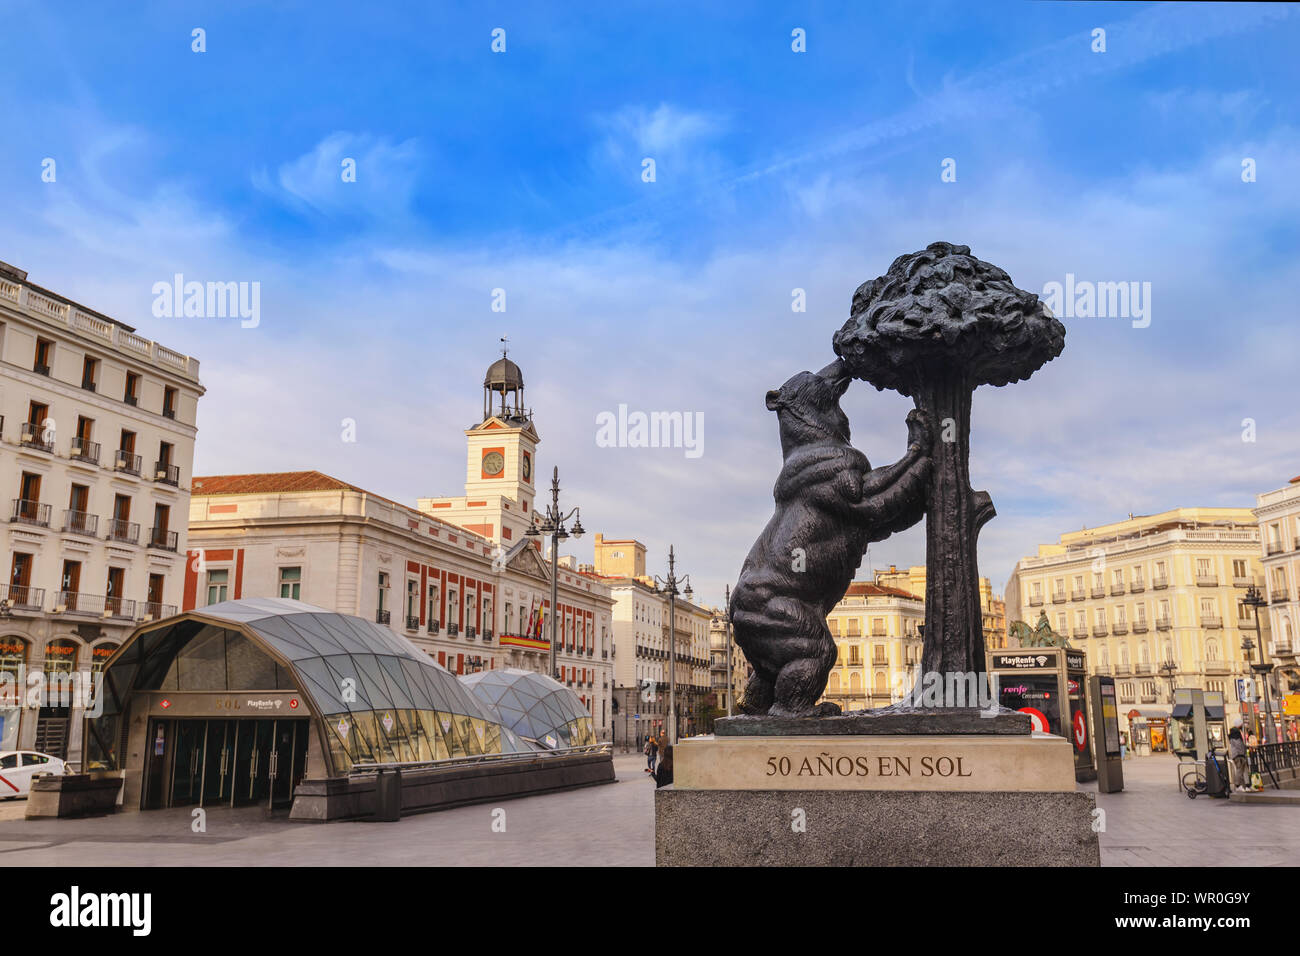 Madrid, Spain - April 14, 2019: Madrid Spain city skyline at Puerta del Sol square with statue of the bear and the strawberry tree Stock Photo